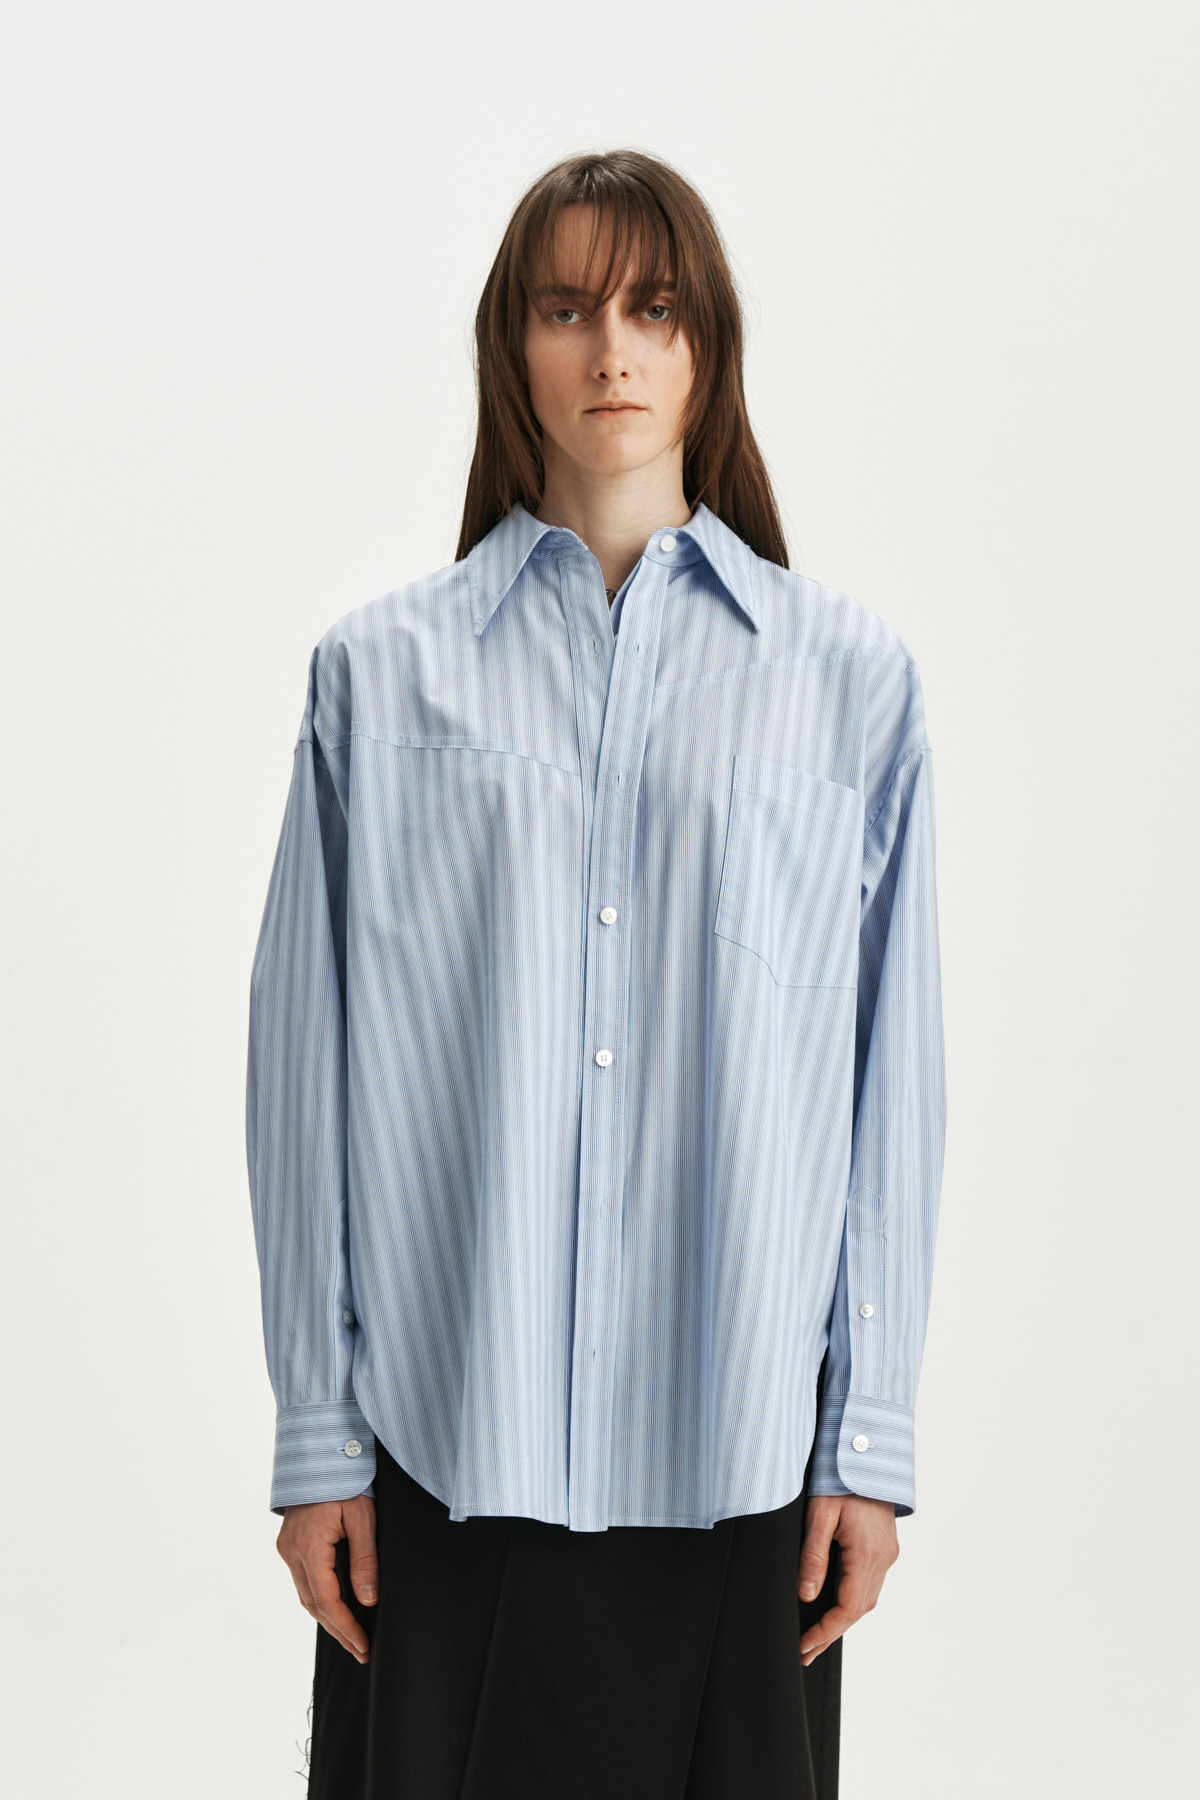 TWO WAY SILHOUETTE SHIRT IN BLUE